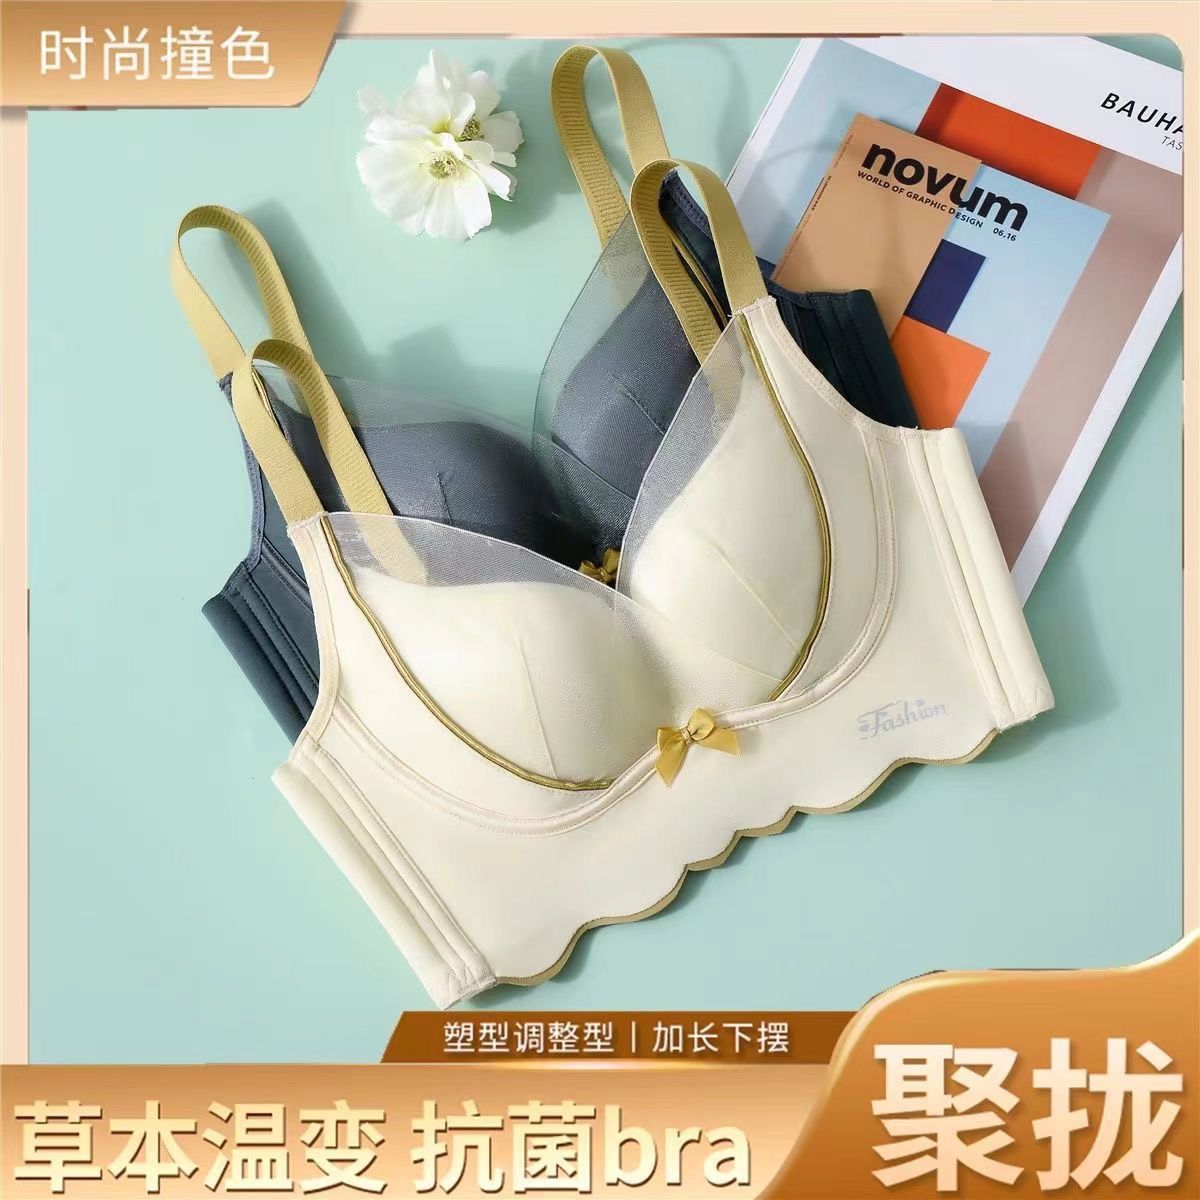 Small breasts gathered non-trace adjustable underwear women's comfortable thick cup storage breast anti-sagging sexy thin bra